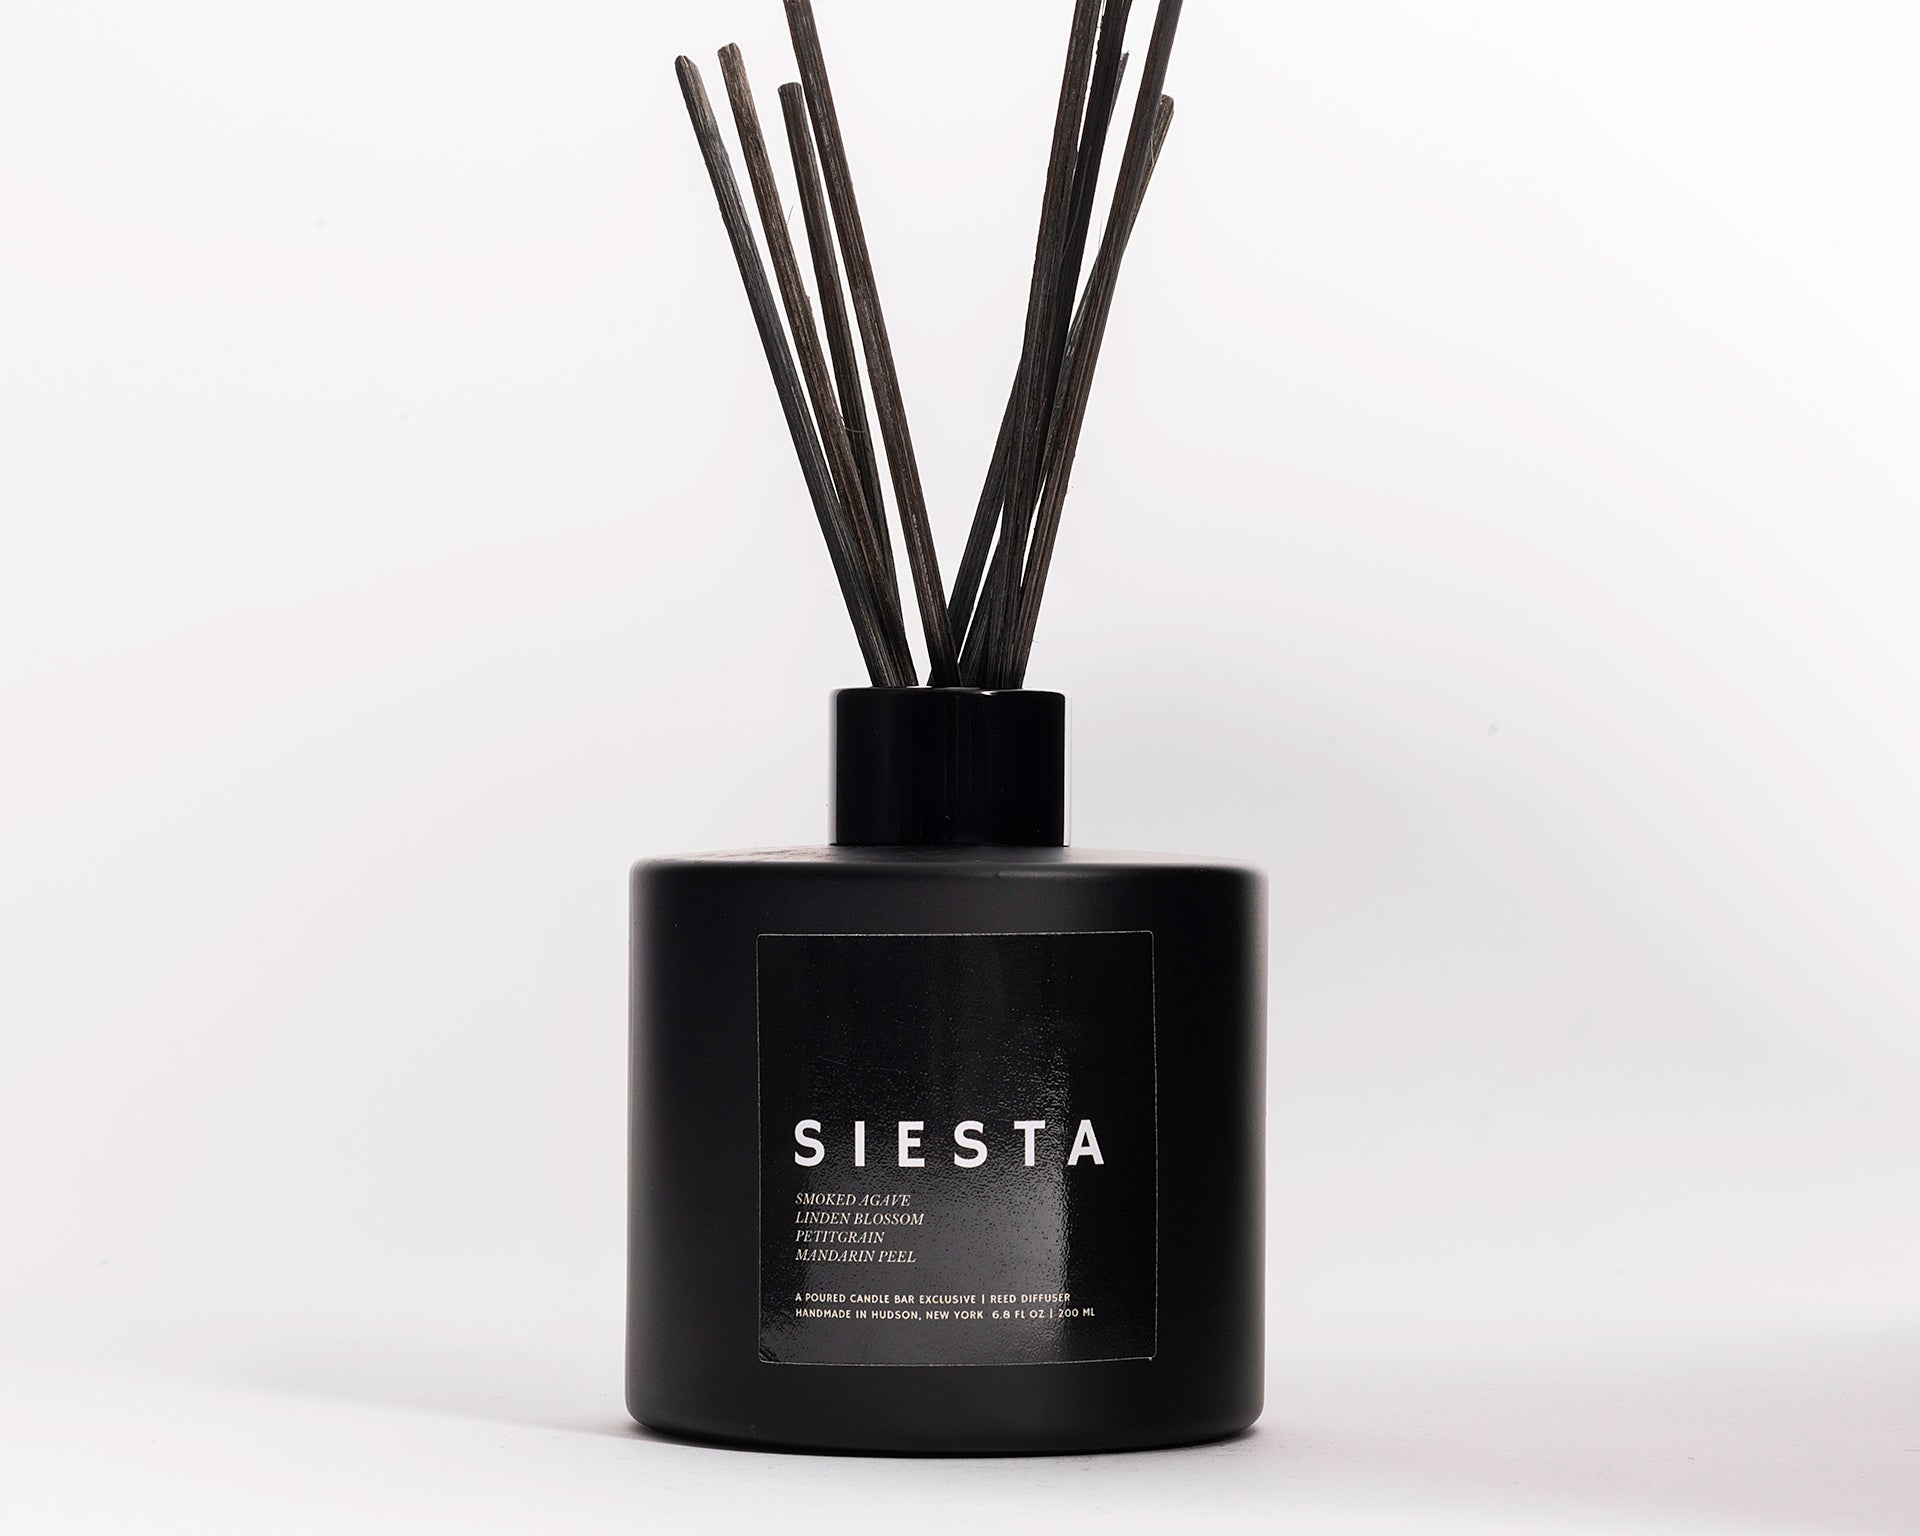 200 ml reed diffusers in a black circular glass vessel.  Profile Description:  Smoky + sweet with faint blossoms + citrus rind  Notes: Smoke, Agave, Linden Blossom, Petitgrain Oil, Mandarin Peel